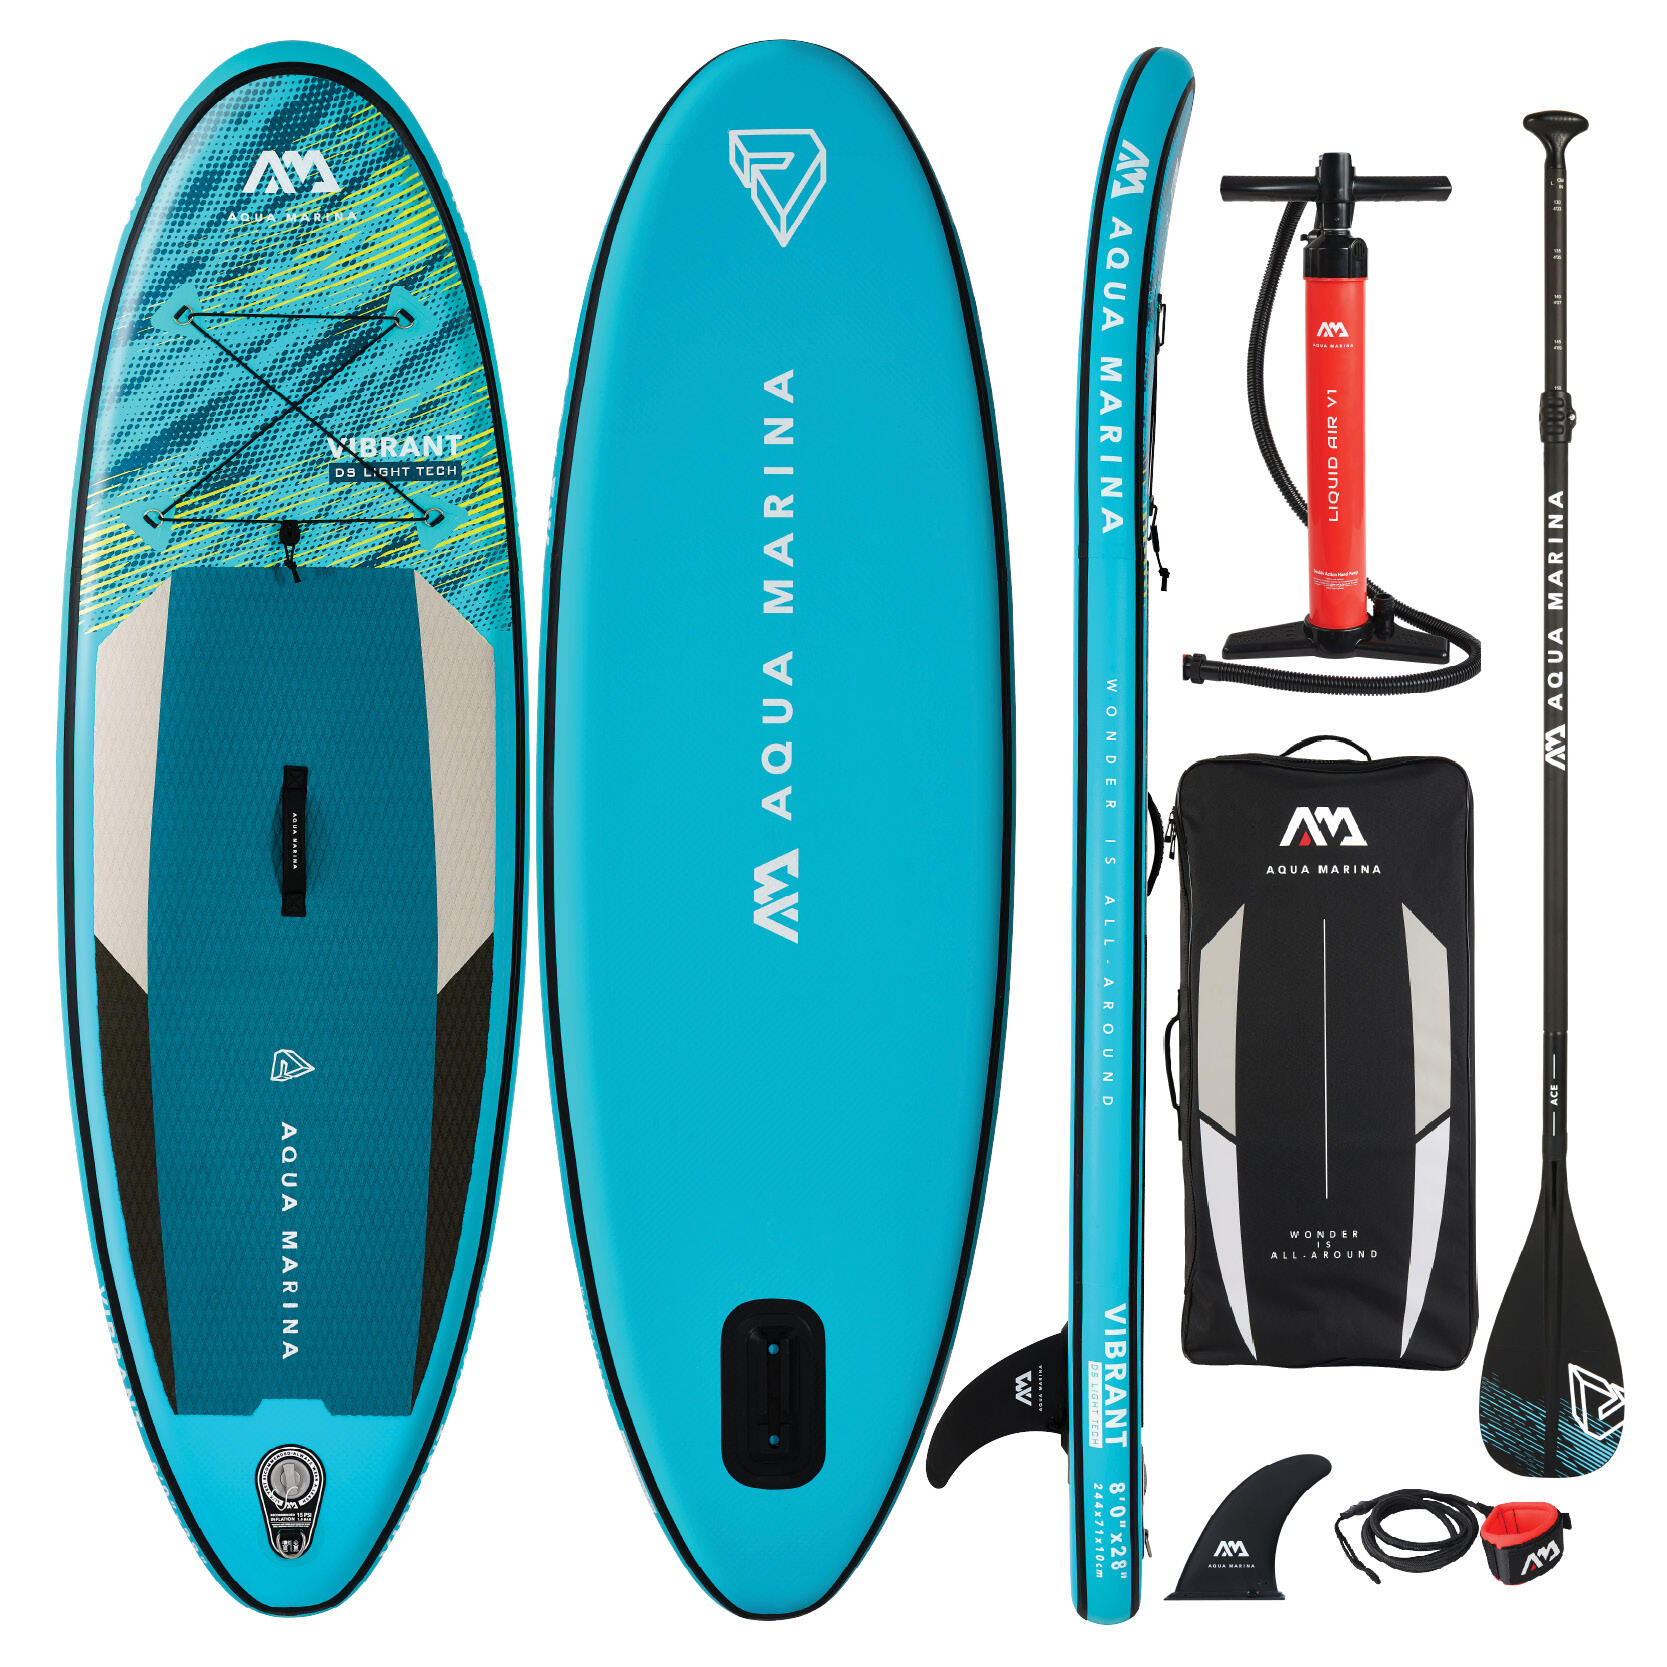 Aqua Marina Vibrant Youth 8ft Inflatable Stand Up Paddleboard Package 1/7